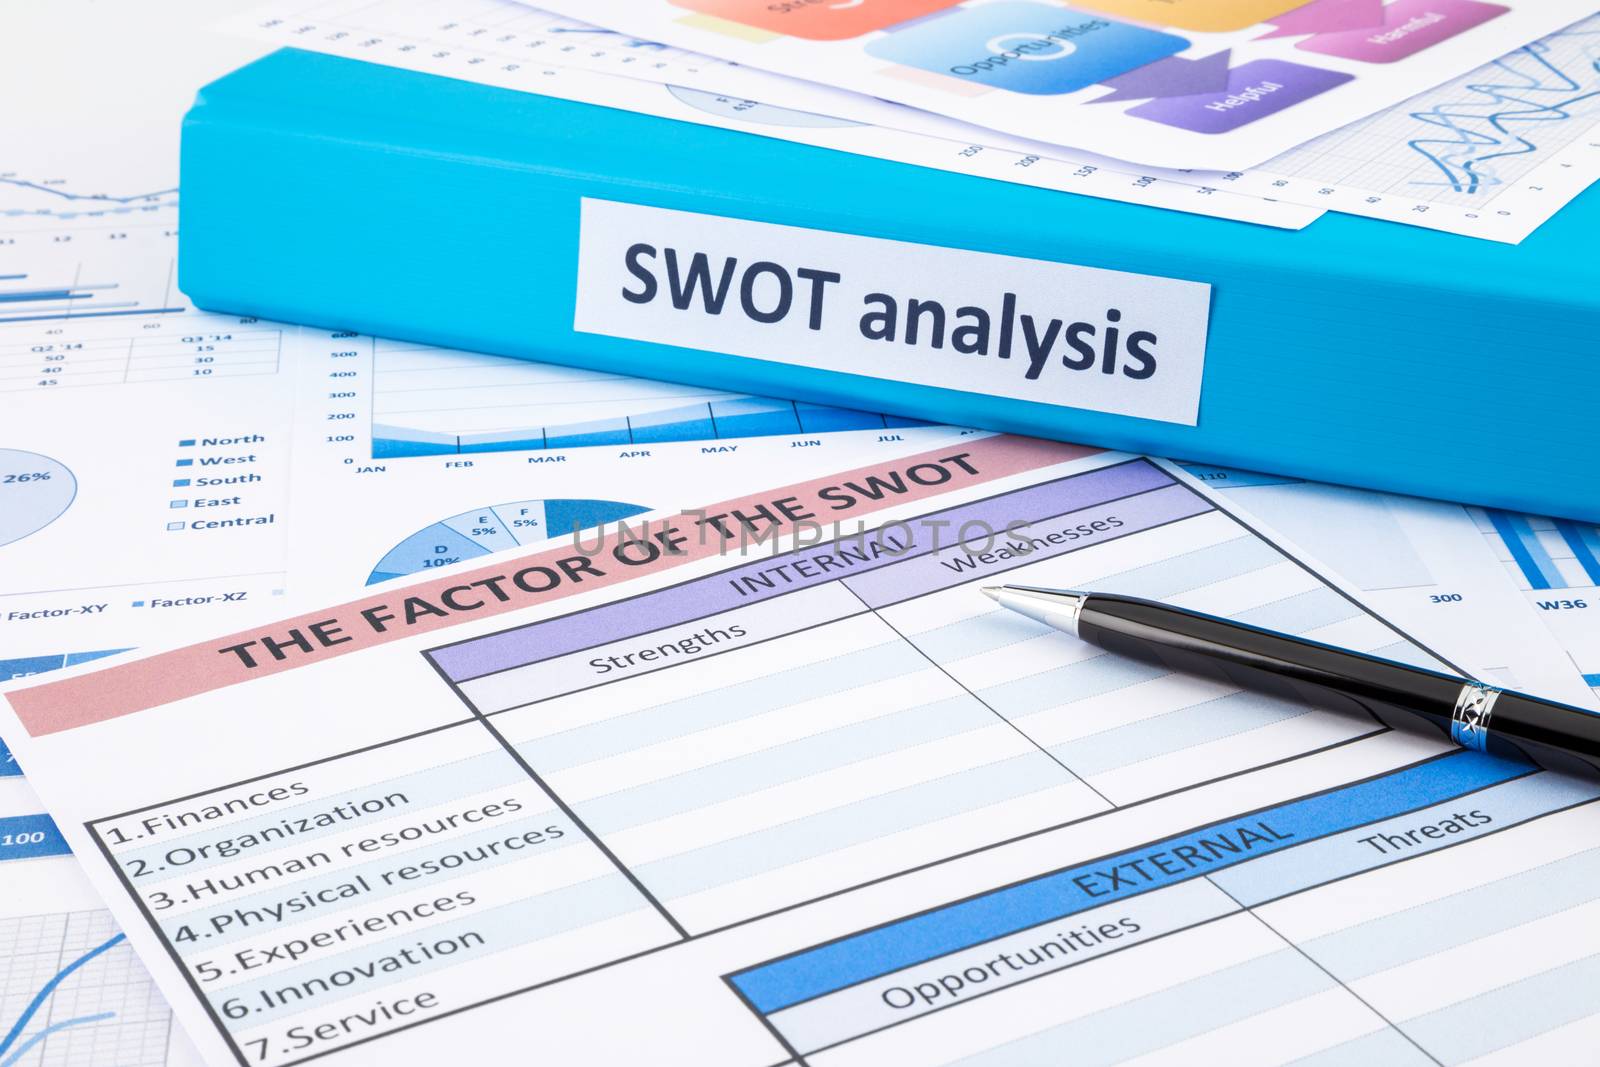 Blue binder, SWOT analysis documents and graph report concept for business planning and evaluation